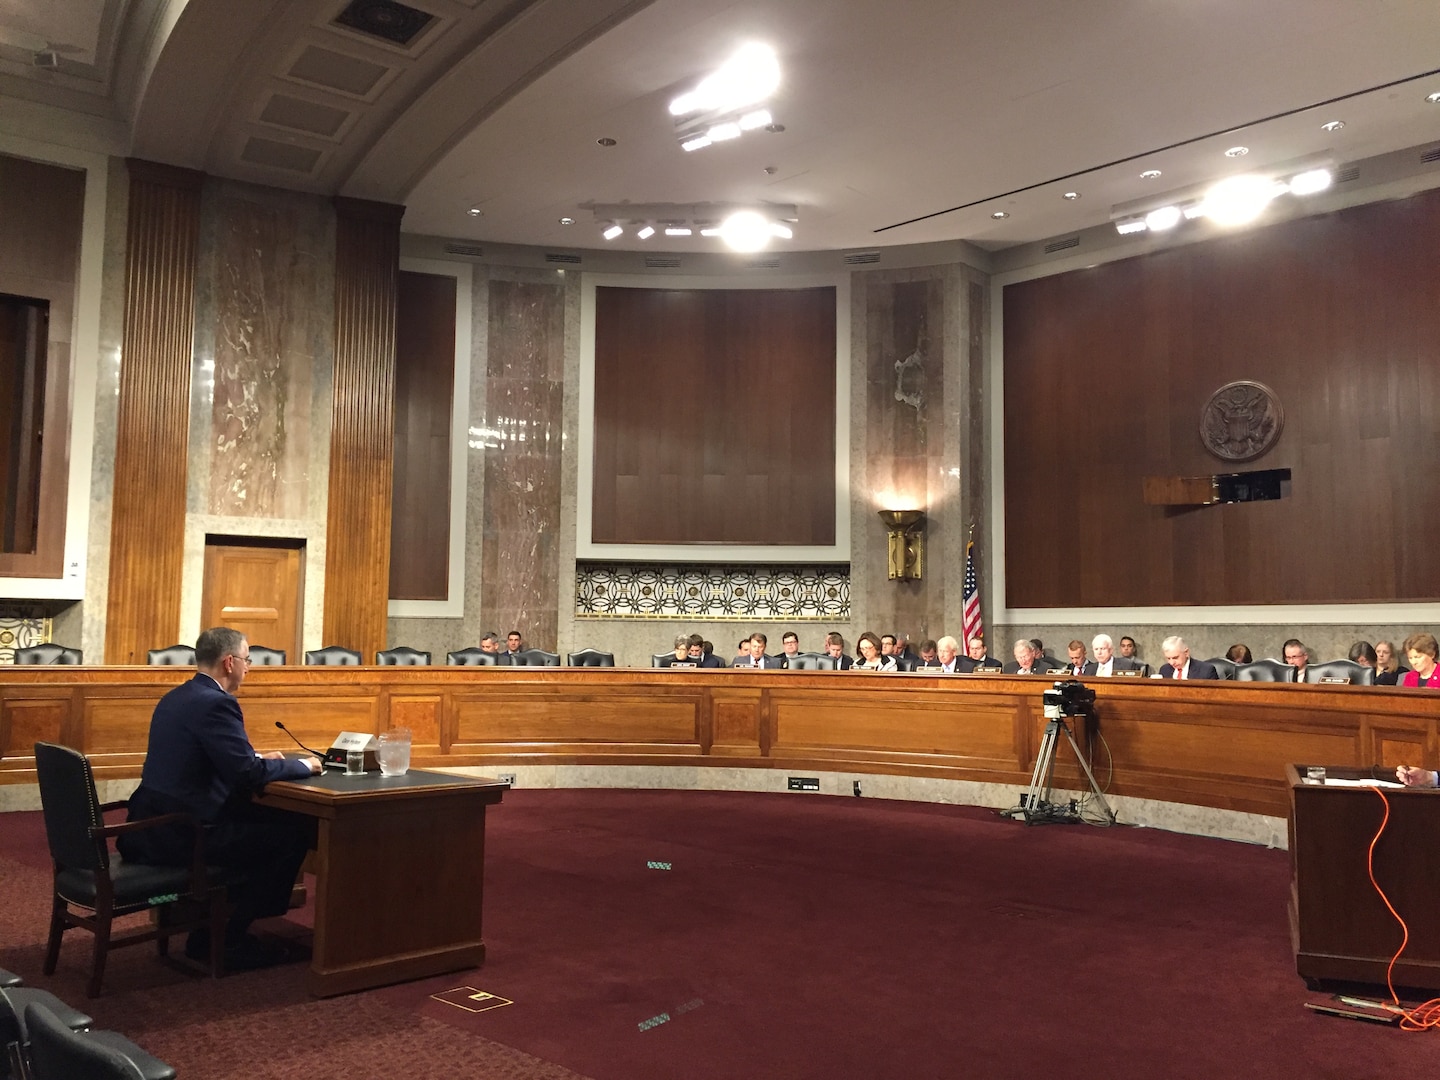 U.S. Air Force Gen. John E. Hyten (seated, left), commander of U.S. Strategic Command (USSTRATCOM), testifies before the Senate Armed Services Committee at the Dirksen Senate Office Building, Washington, D.C., April 4, 2017. Hyten provided the committee with an assessment of USSTRATCOM's strategic nuclear posture.